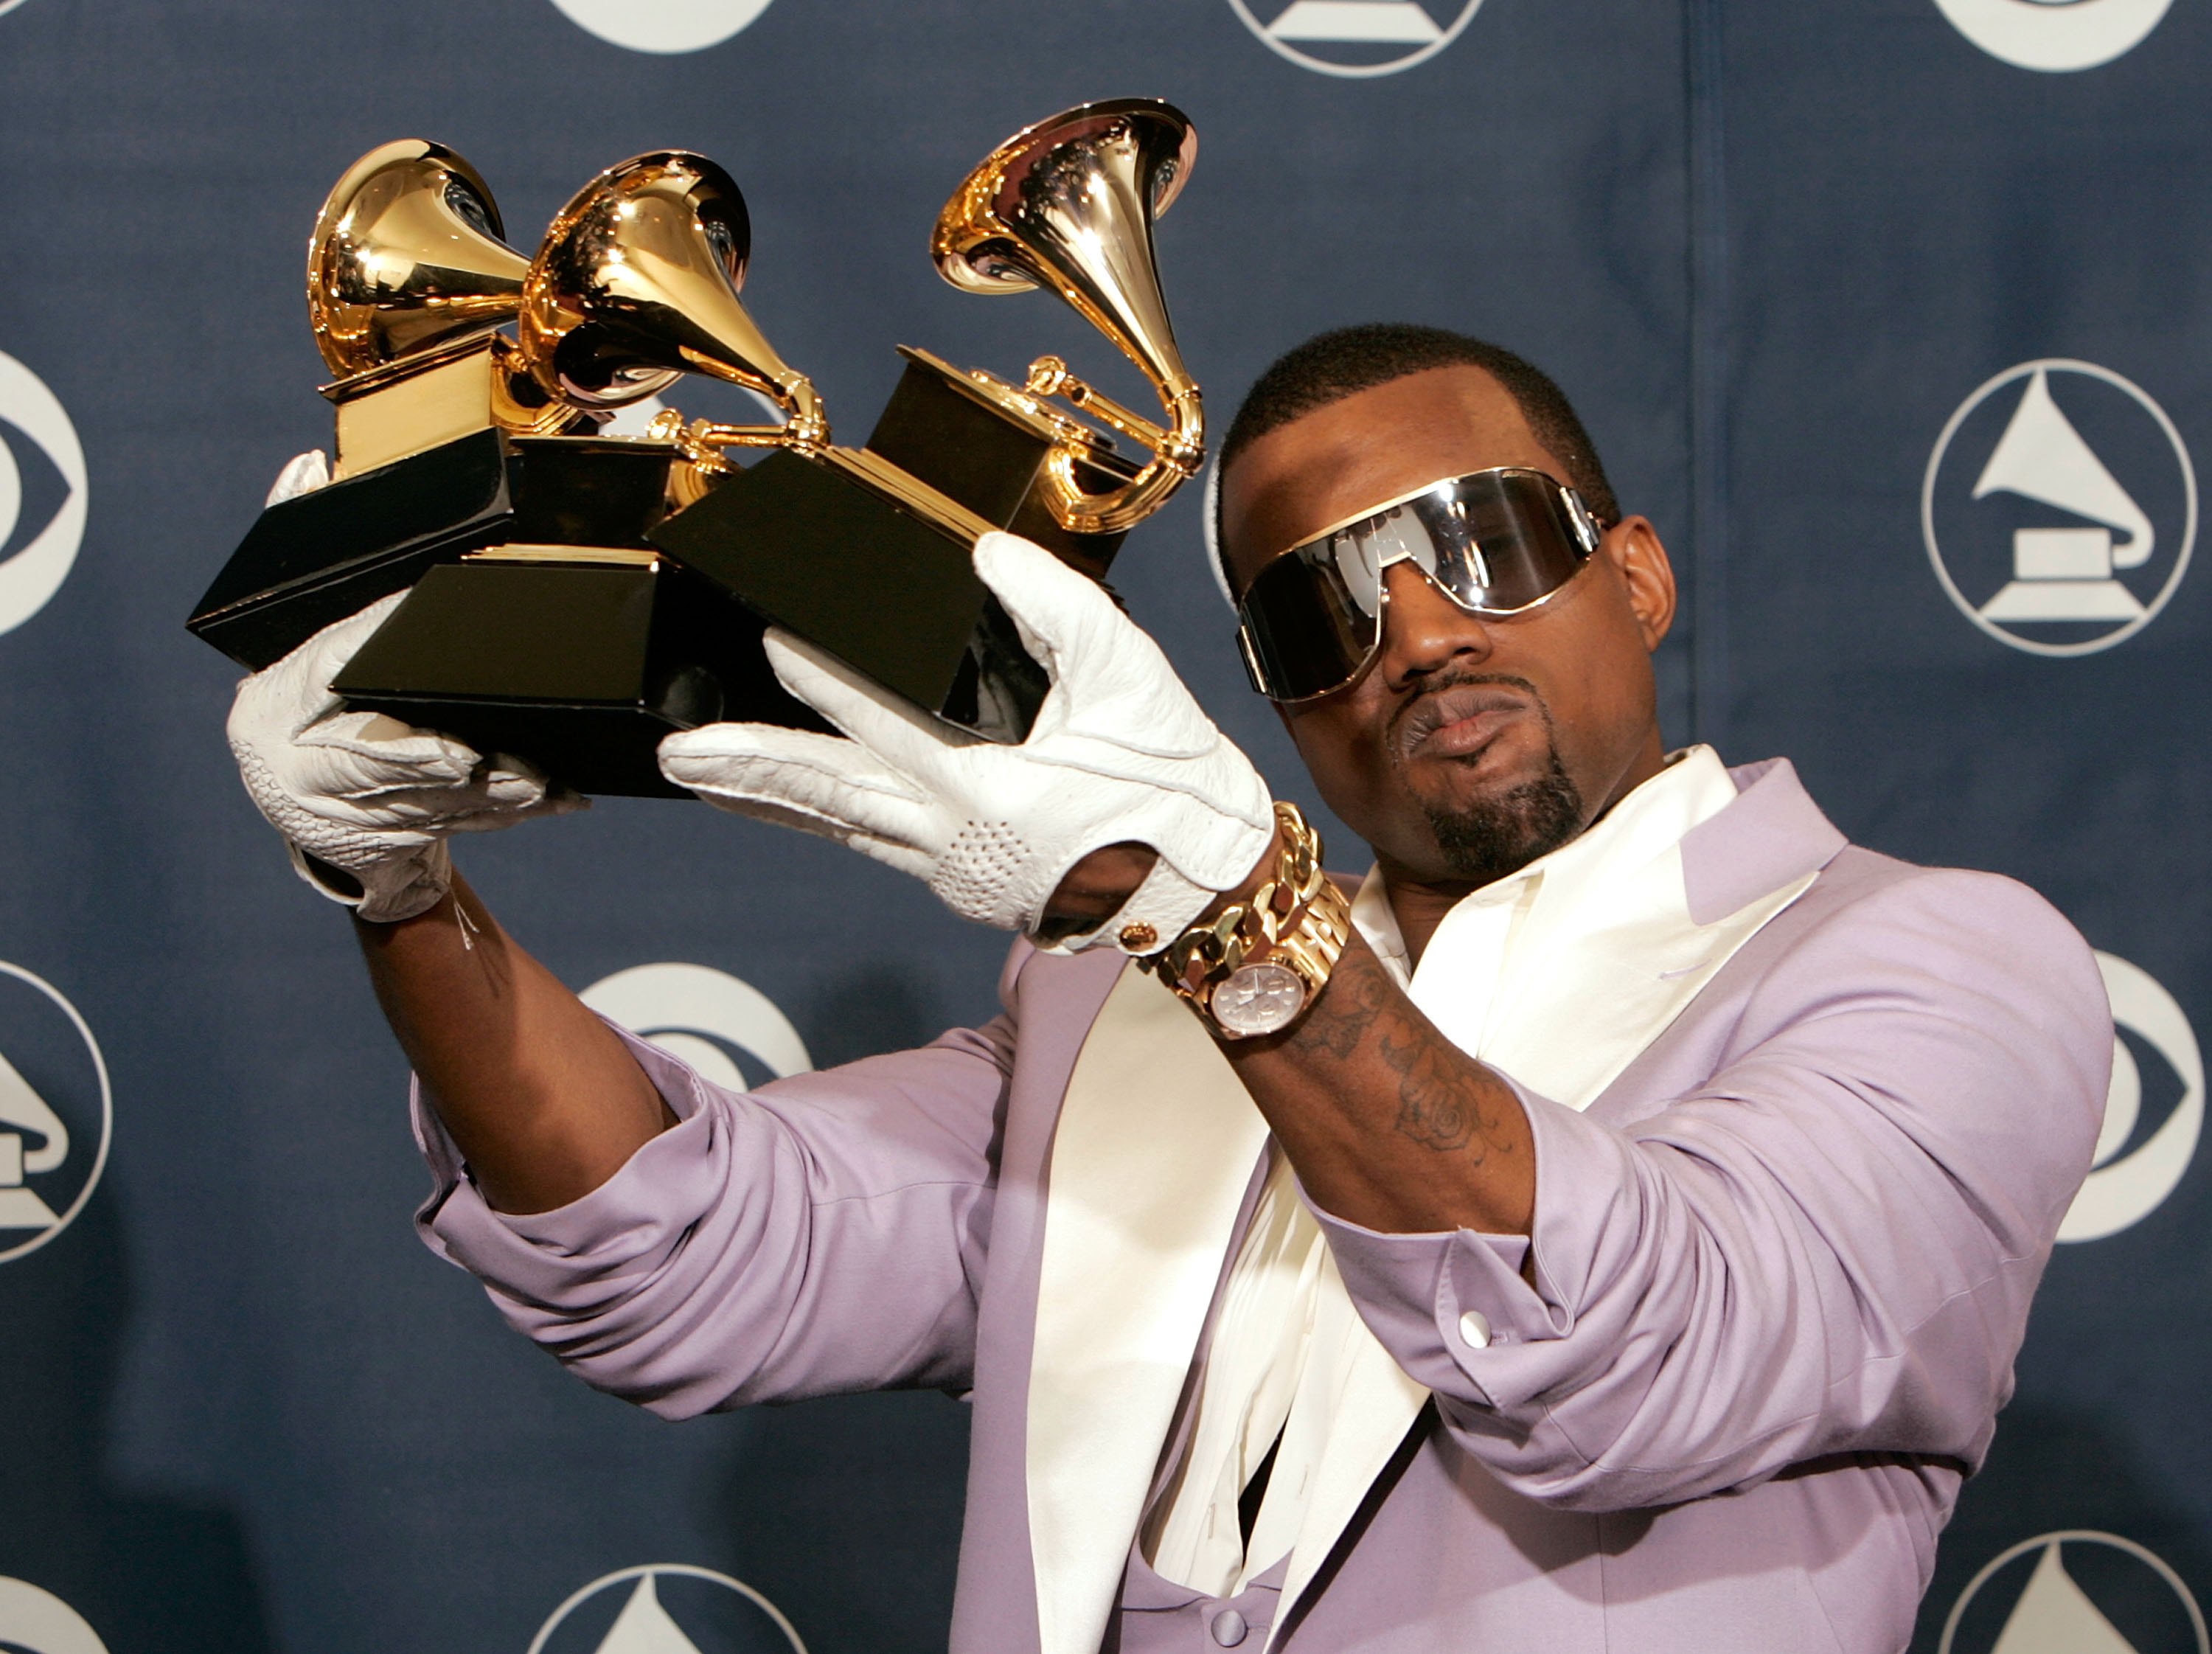 Kanye with a bunch of Grammys. This could be you!